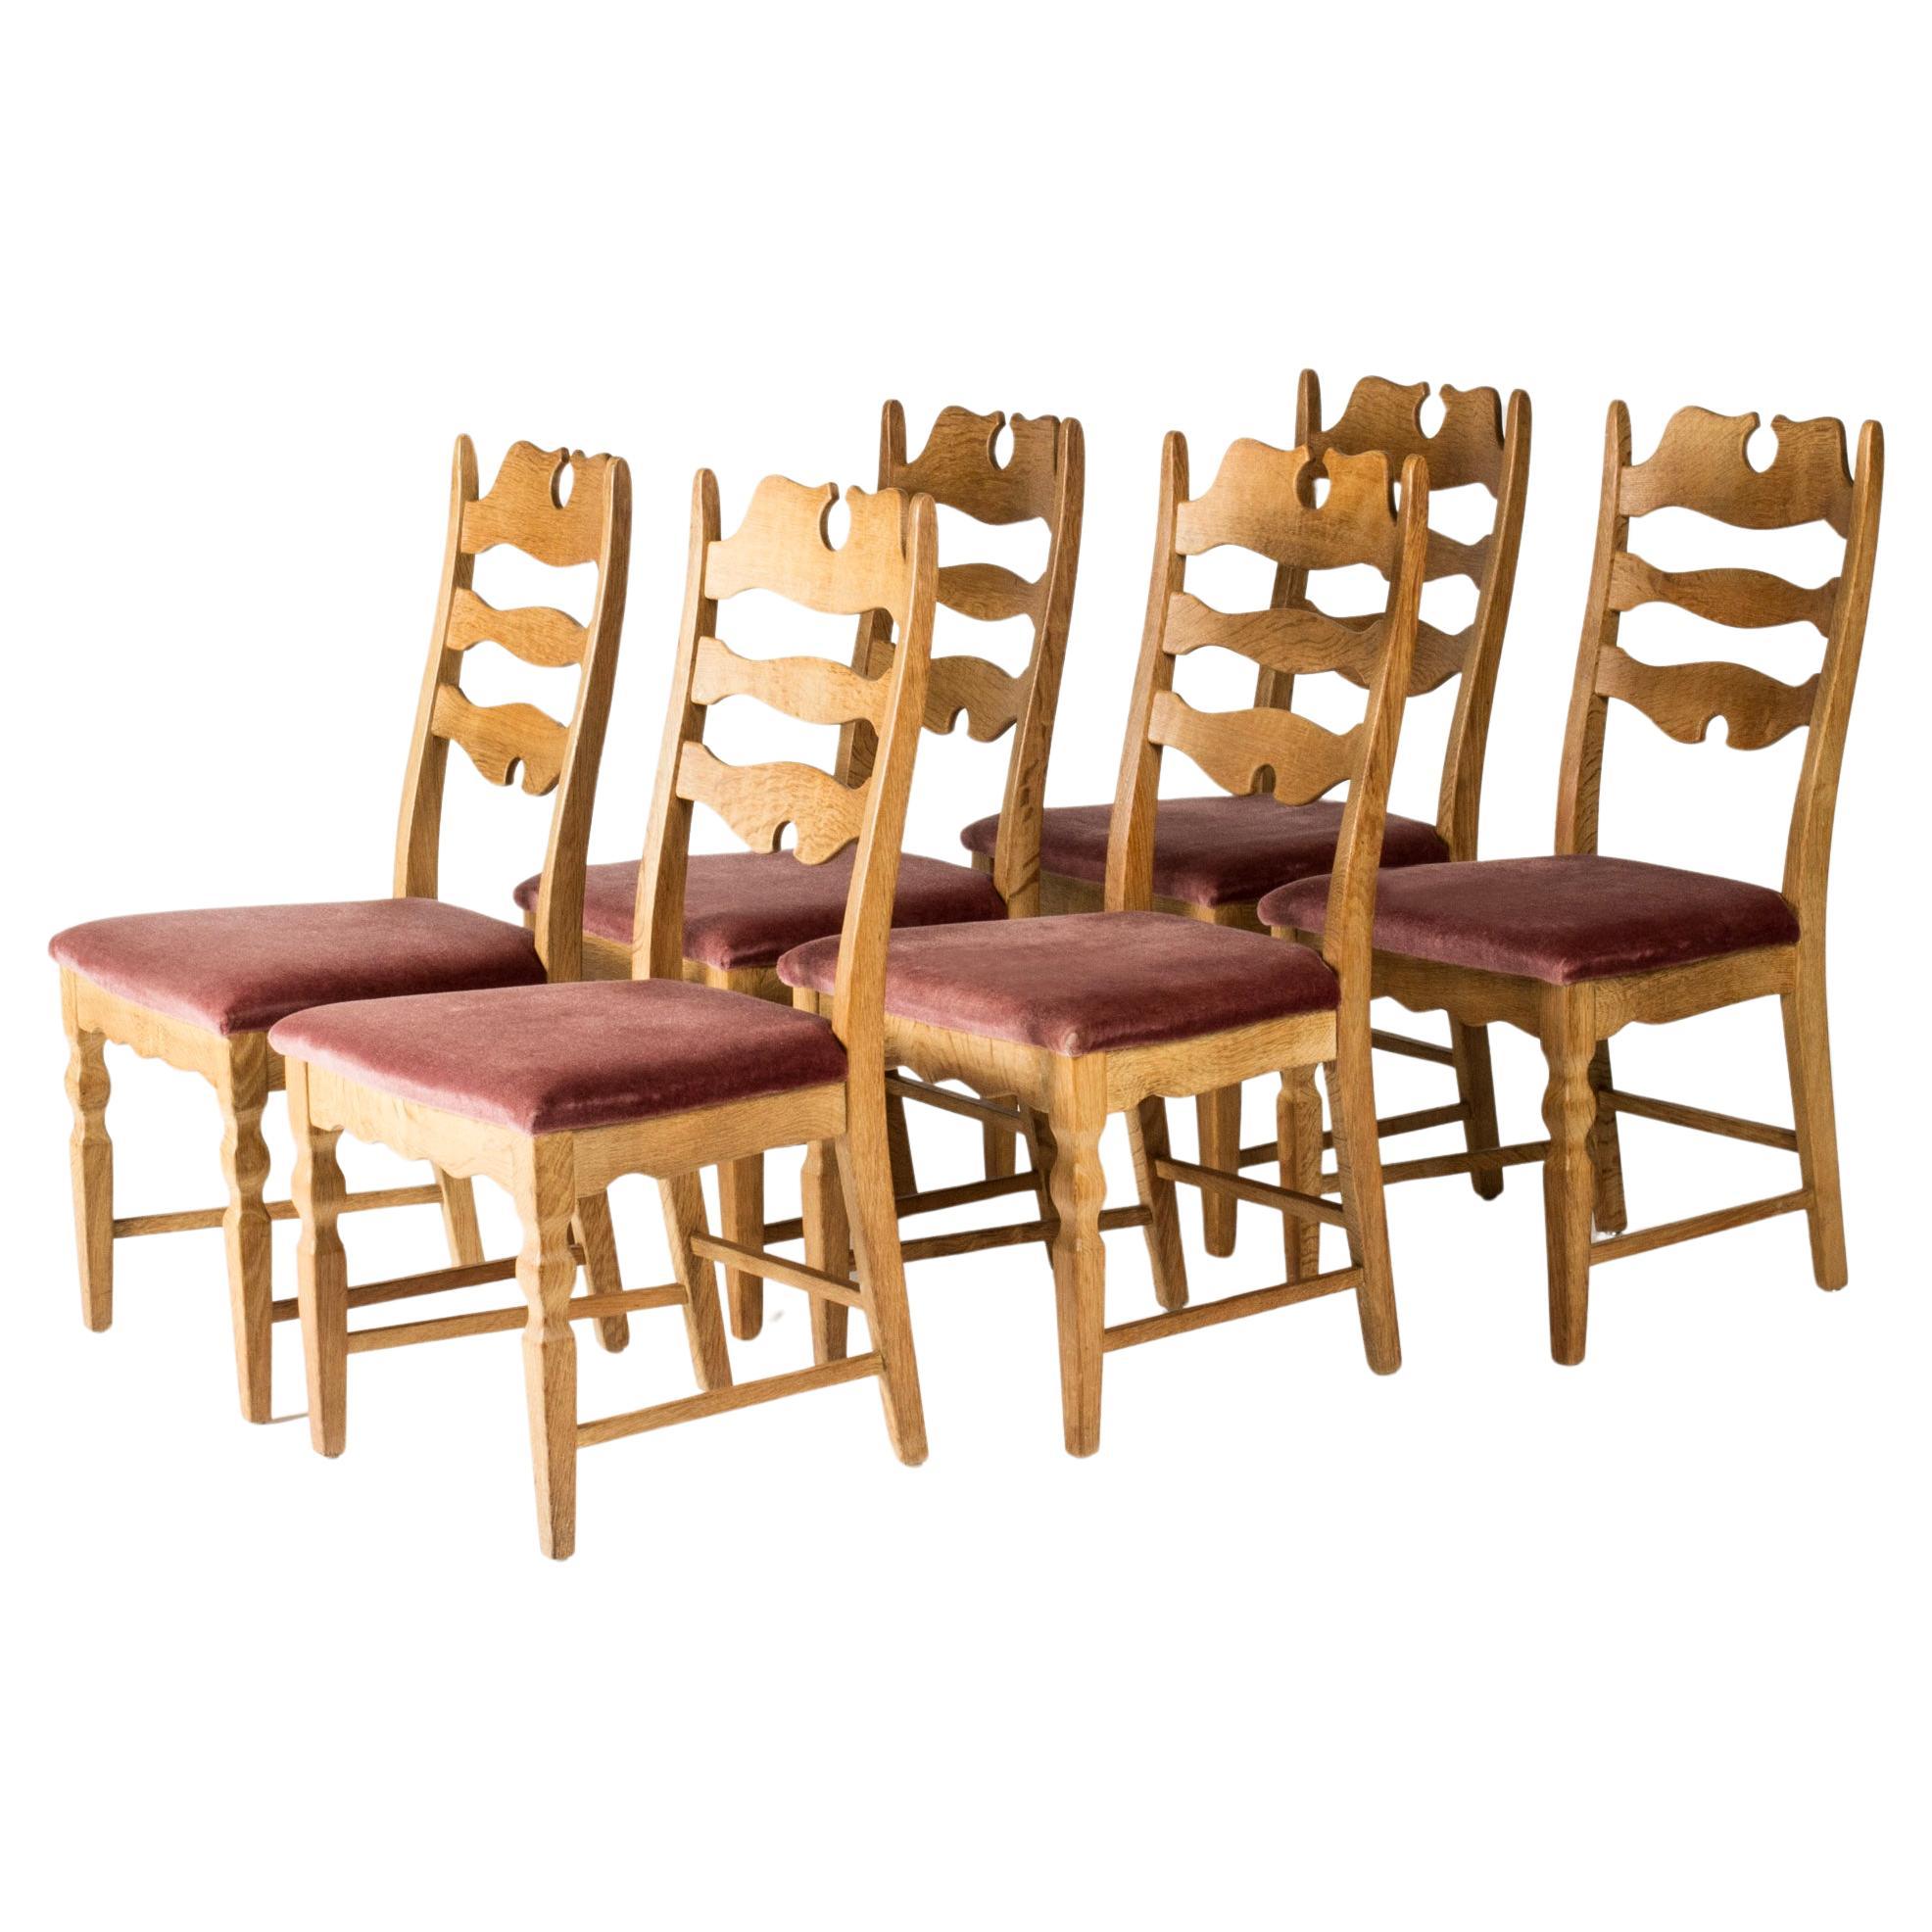 Midcentury dining chairs by Henning Kjærnulf, Denmark, 1960s, set of six